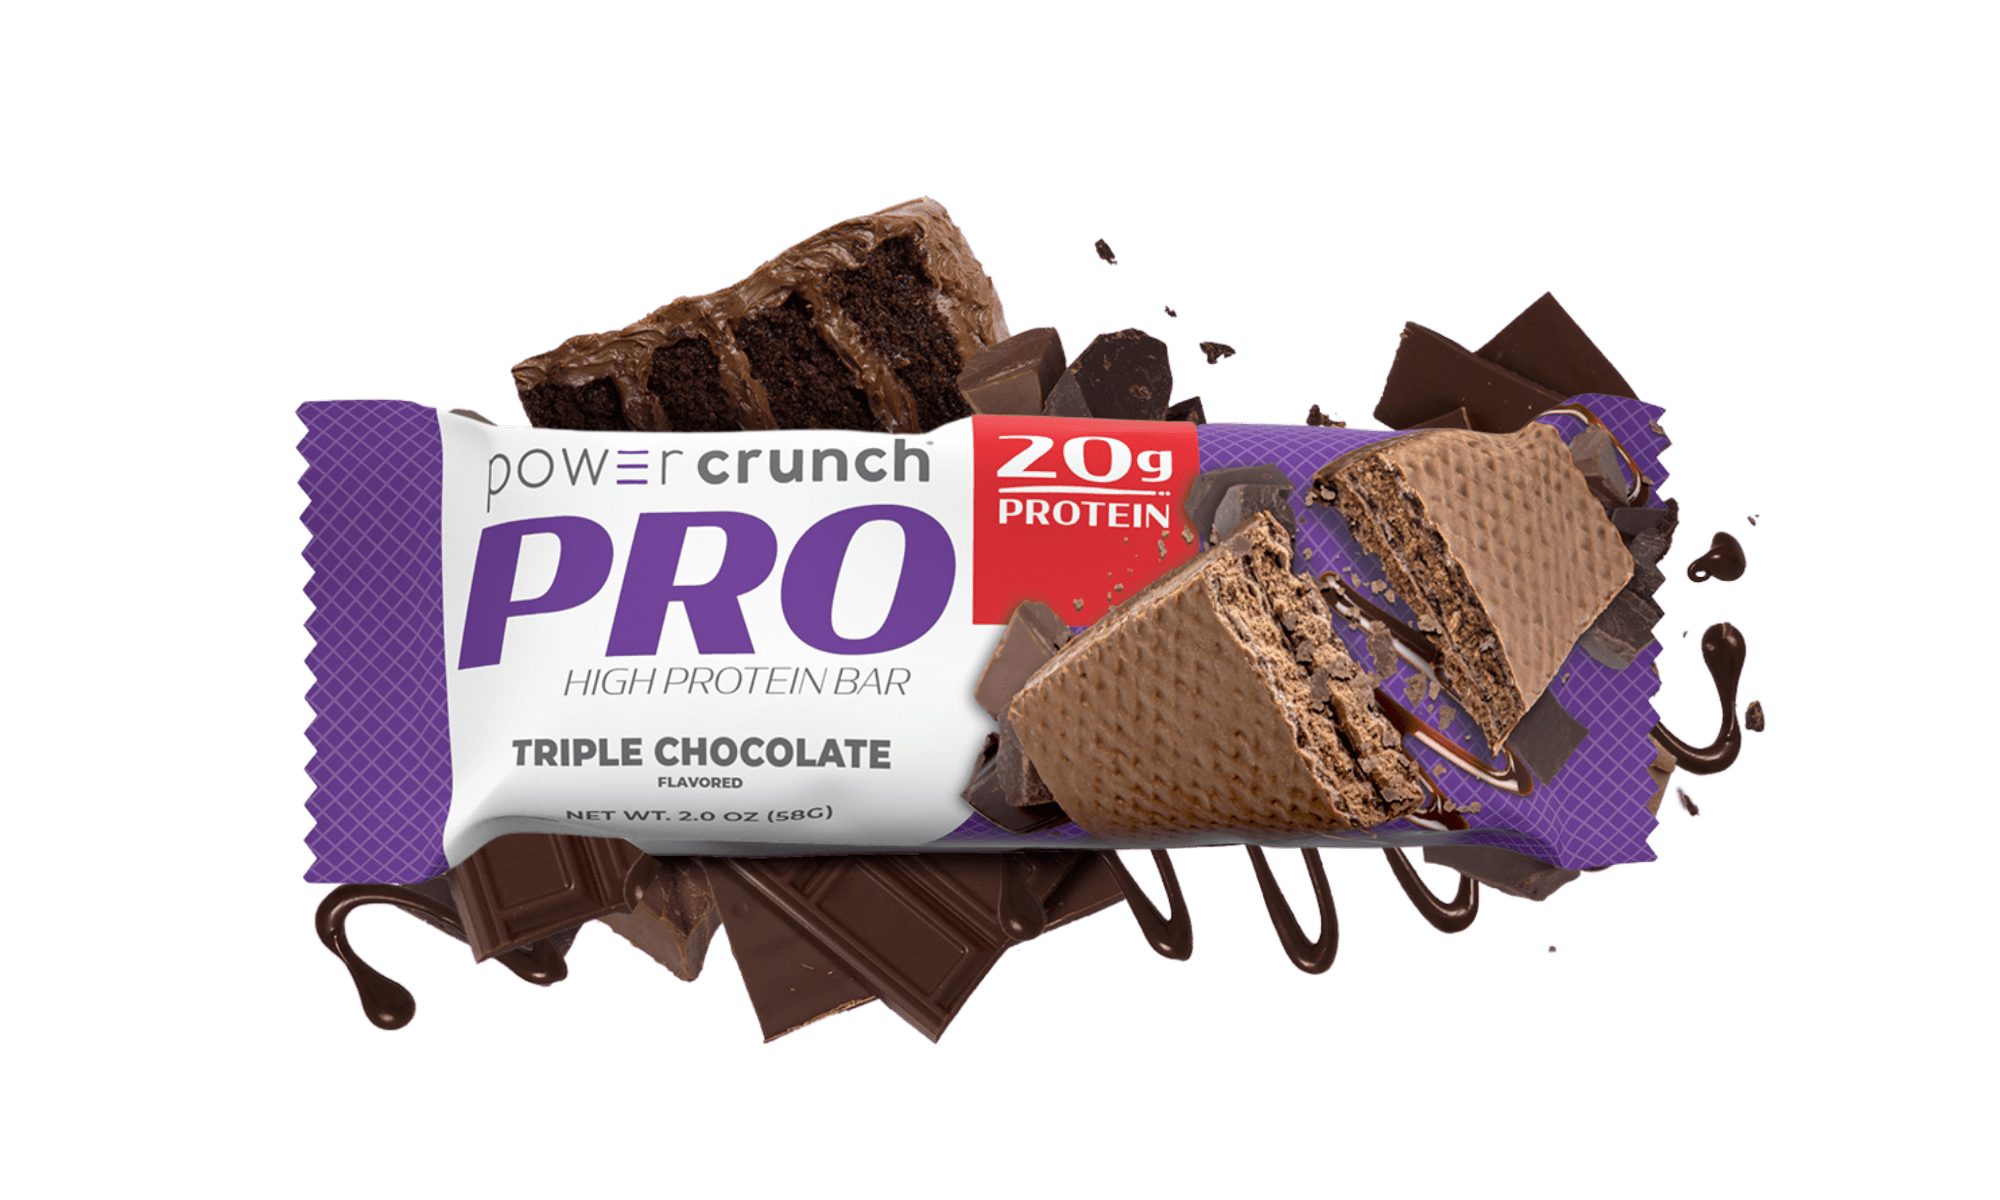 Power Crunch PRO Triple Chocolate 20g protein bars pictured with Triple Chocolate flavor explosion